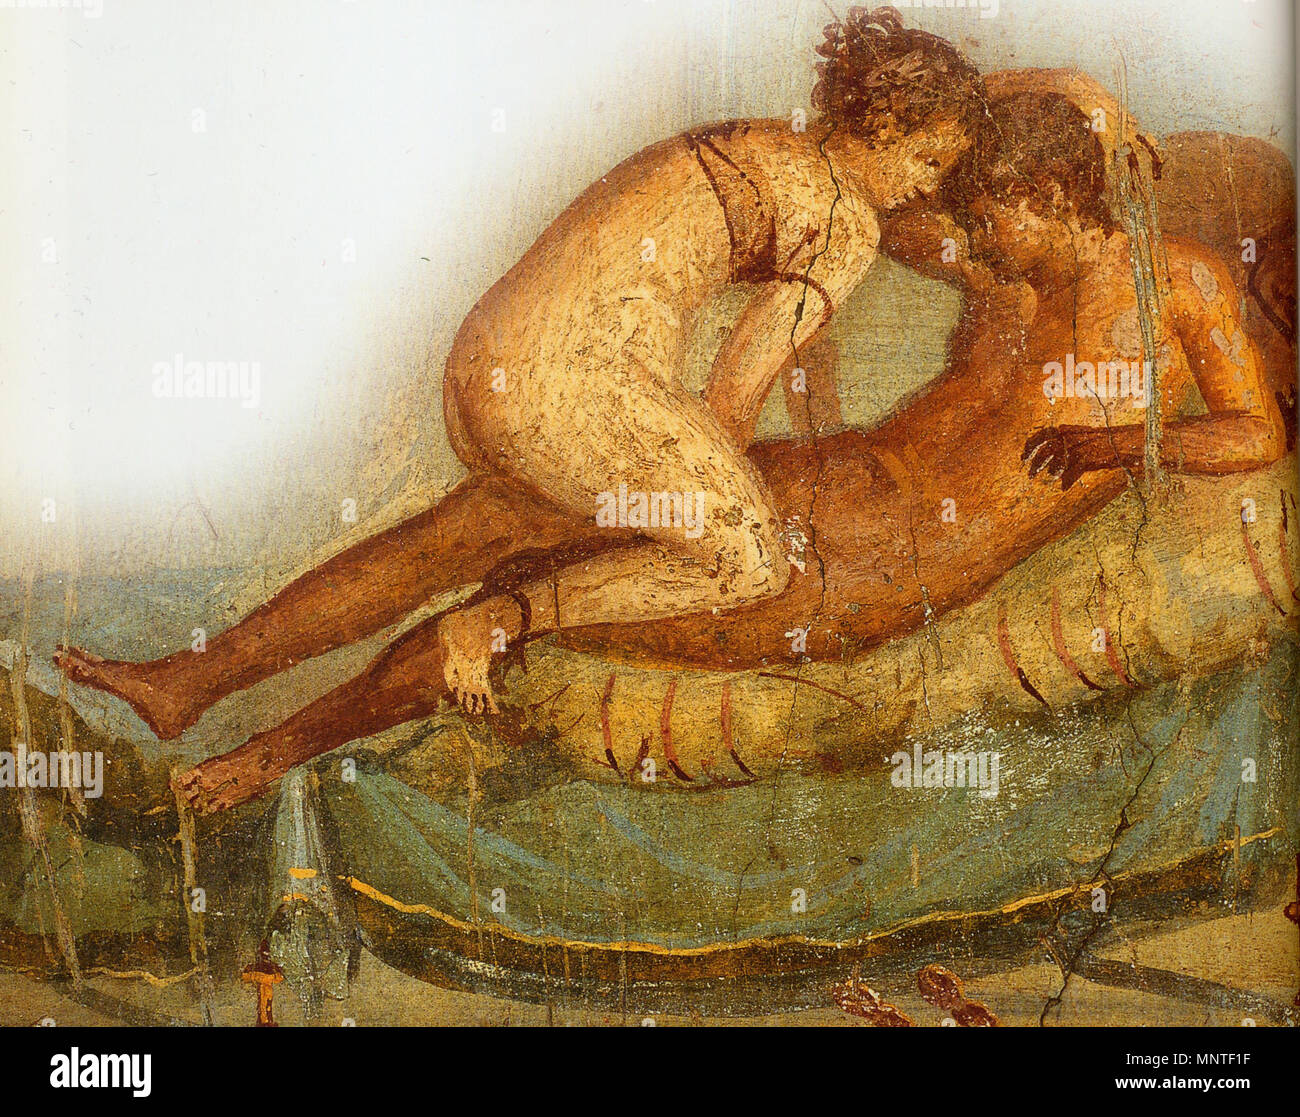 . English: Detail of fresco of couple in bed. From southern wall of room 43 (Cubiculum) in the Casa del Centenario (IX 8,3) in Pompeii, 1st Century. 11 July 2010. Wolfgang Rieger 1012 Pompeii - Casa del Centenario - Love scene Stock Photo